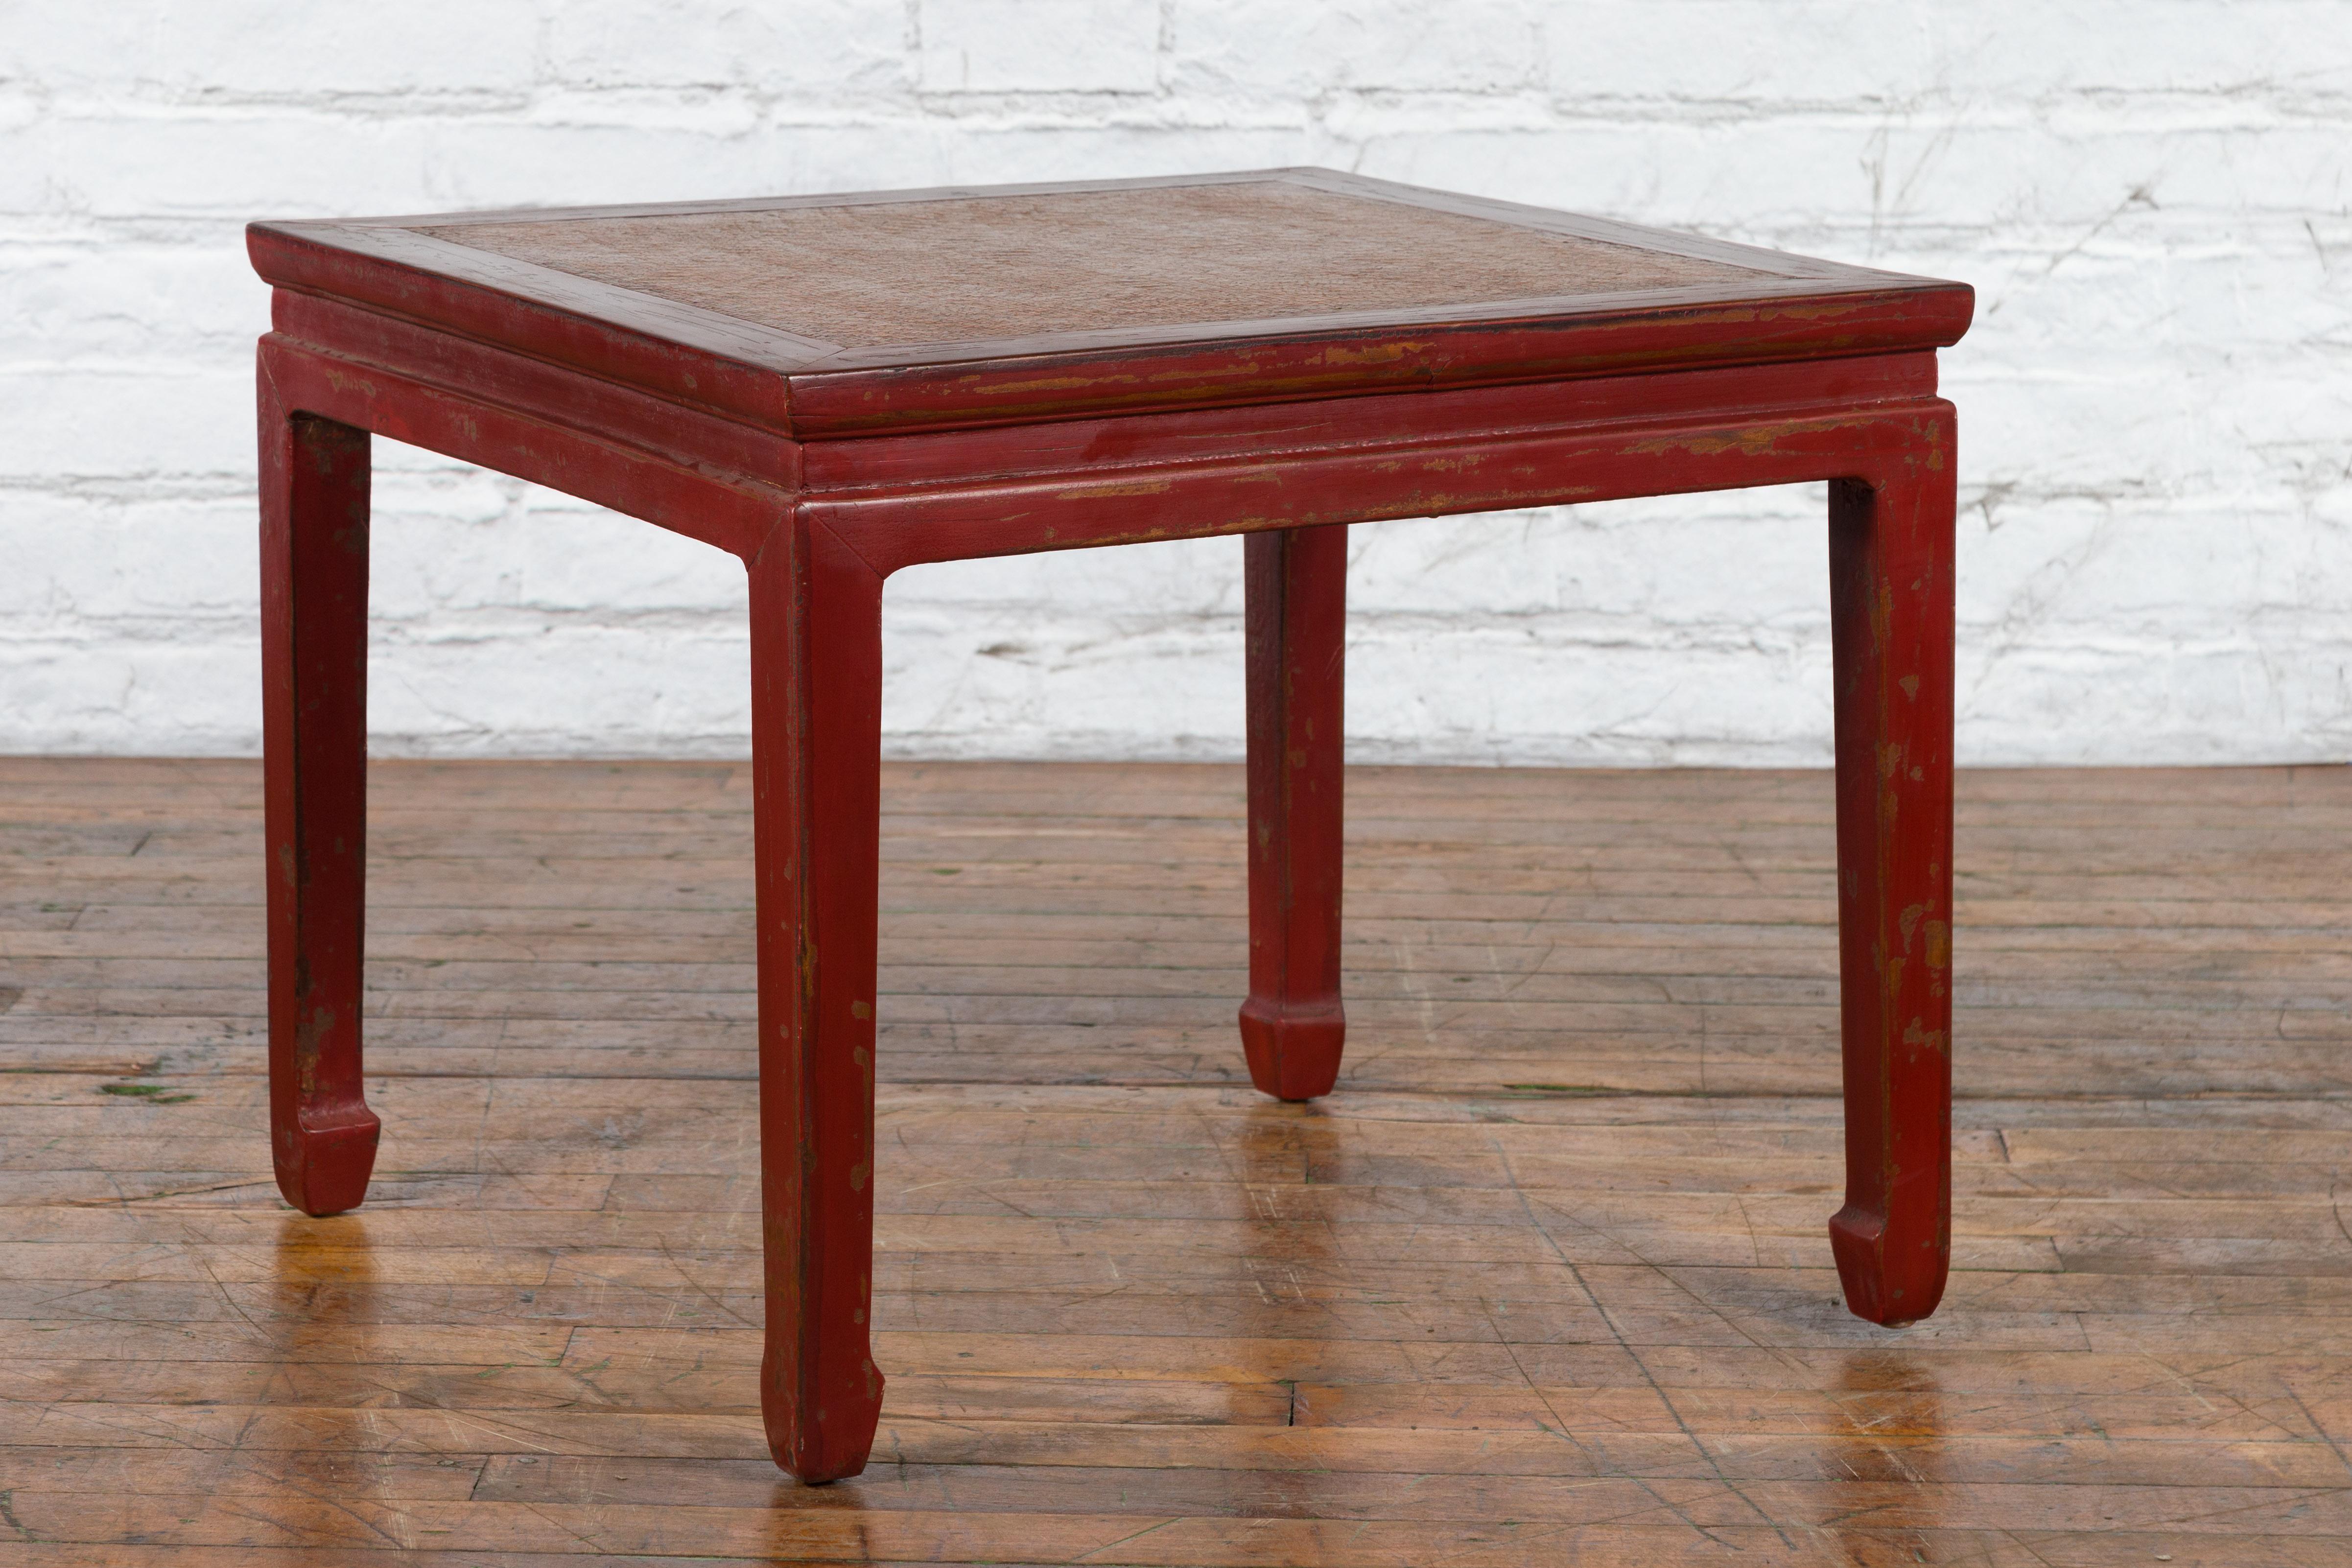 Chinese Qing Dynasty 19th Century Red Lacquer Side Table with Woven Rattan Top For Sale 12